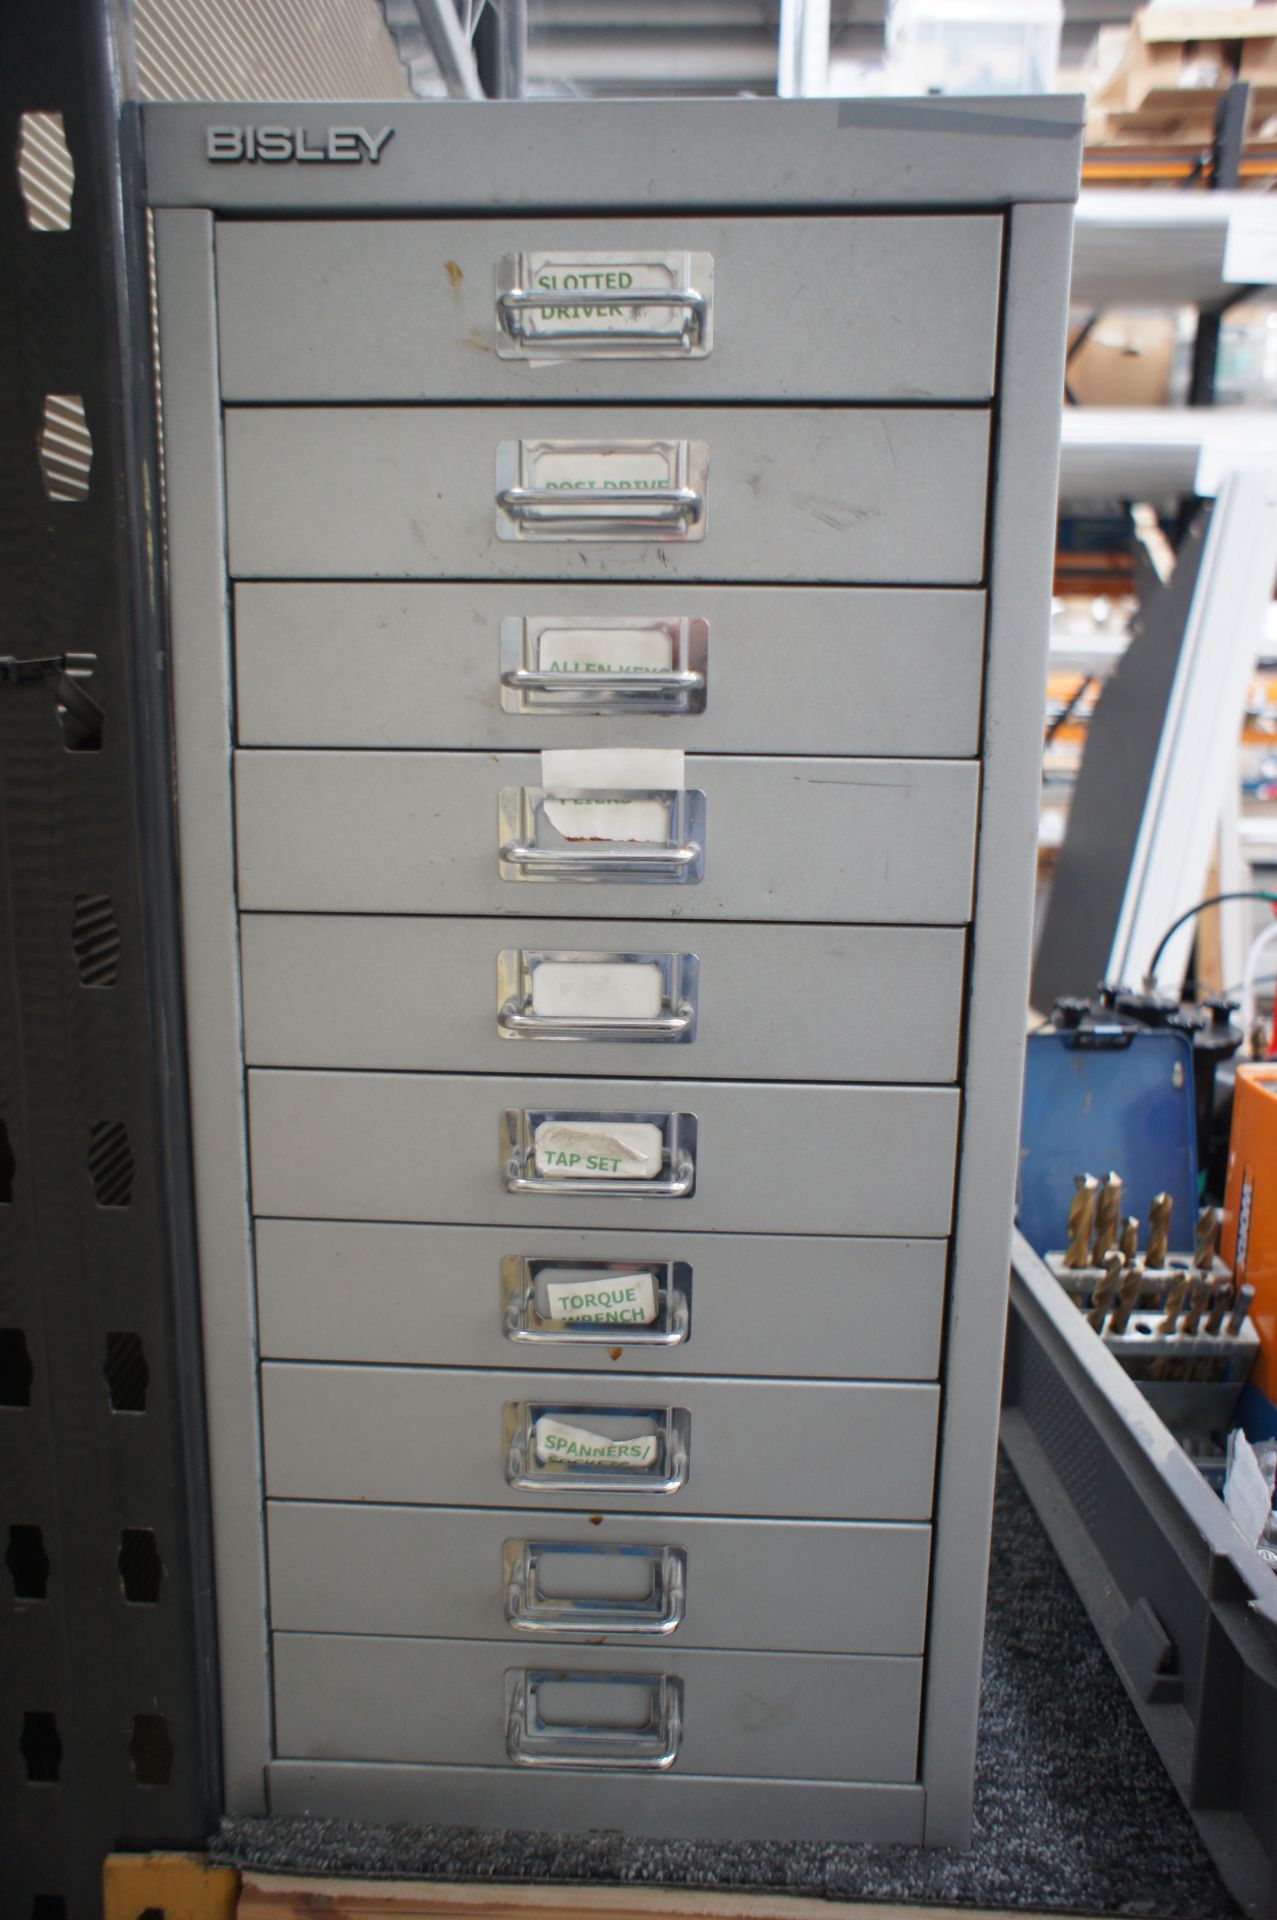 Bisley 10 drawer metal storage cabinet, with contents, to include allen keys, screwdrivers, files - Image 2 of 7